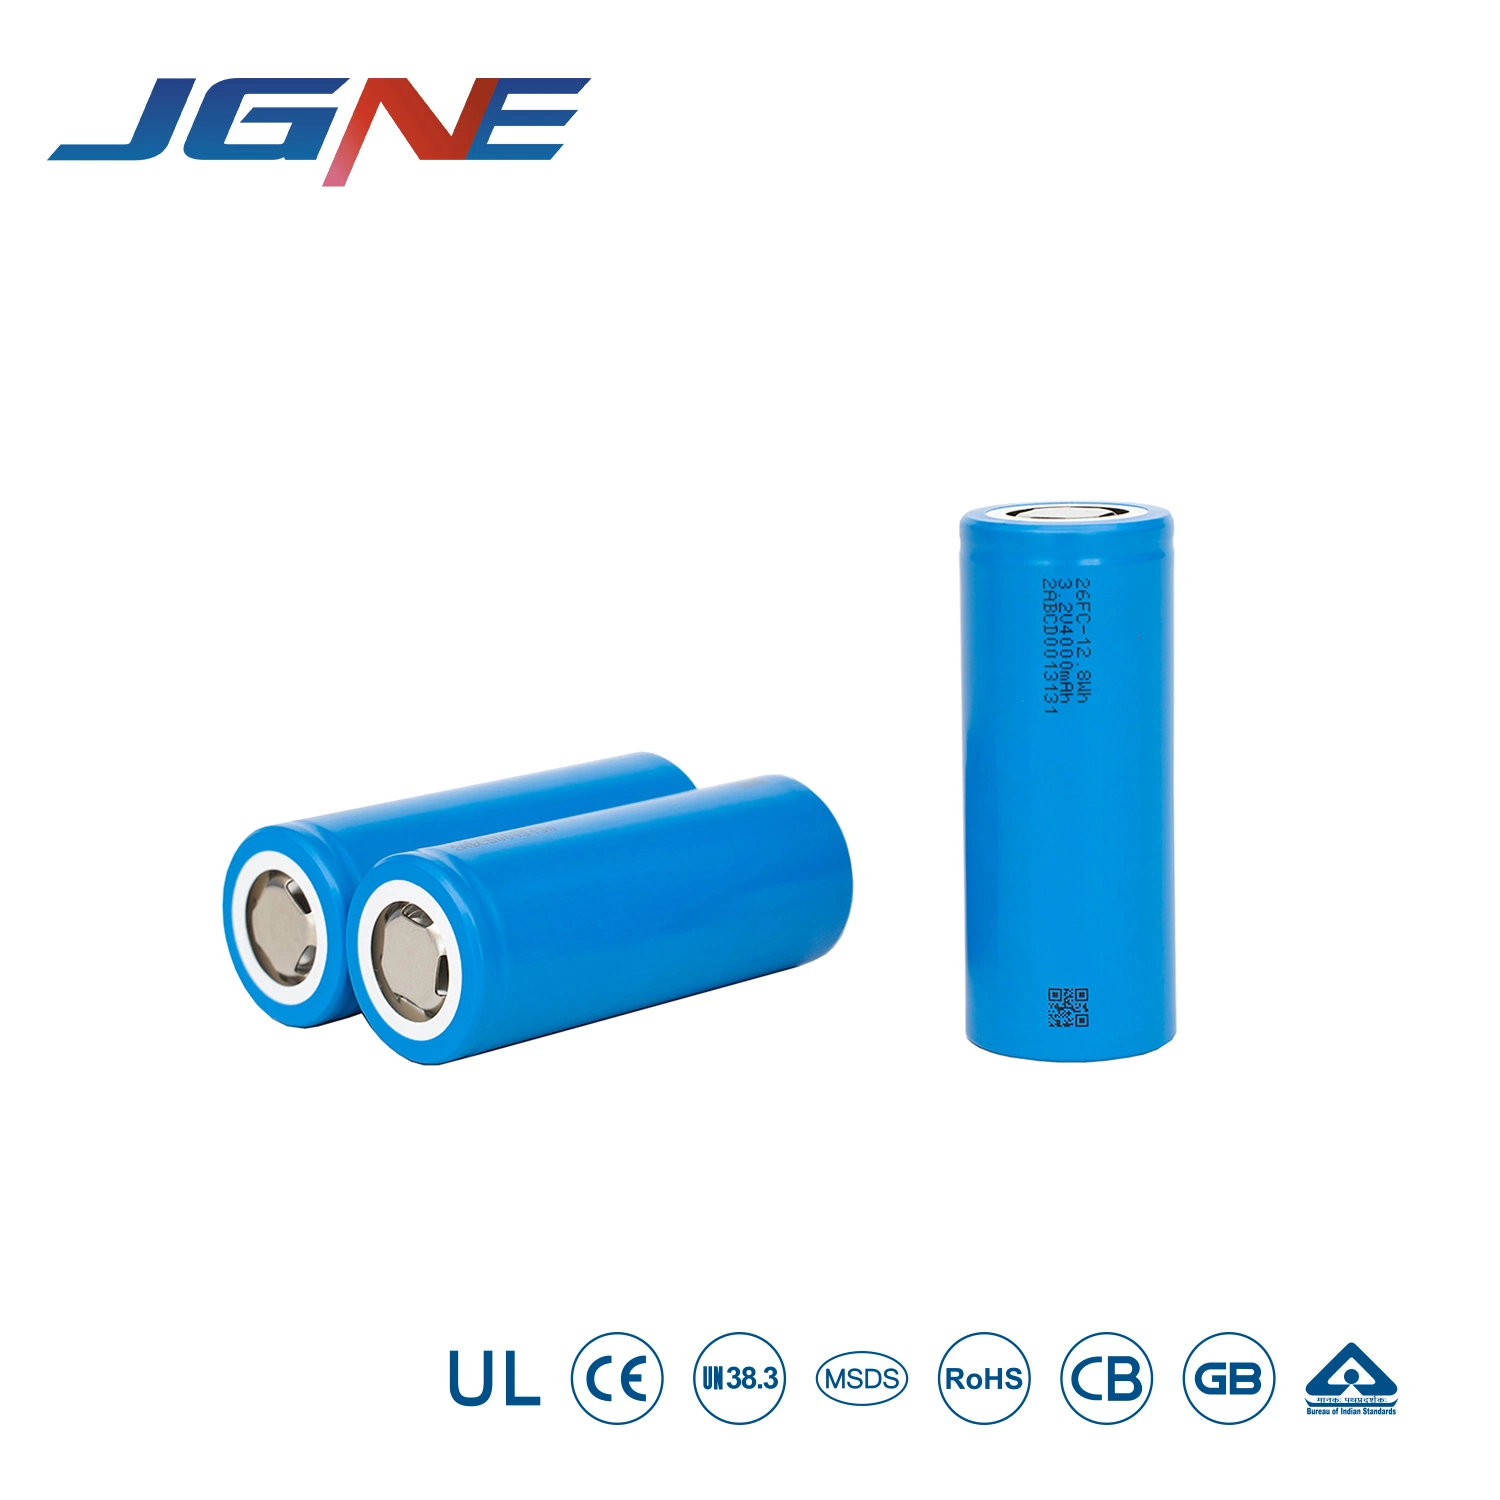 3.2V 1800mAh/2000mAh/2200mAh/3400mAh/3000mAh 18650 26650 Rechargeable Lithium Ion Cell Battery for EV/Electric Scooter/Electric Bicycle with 30A Discharge